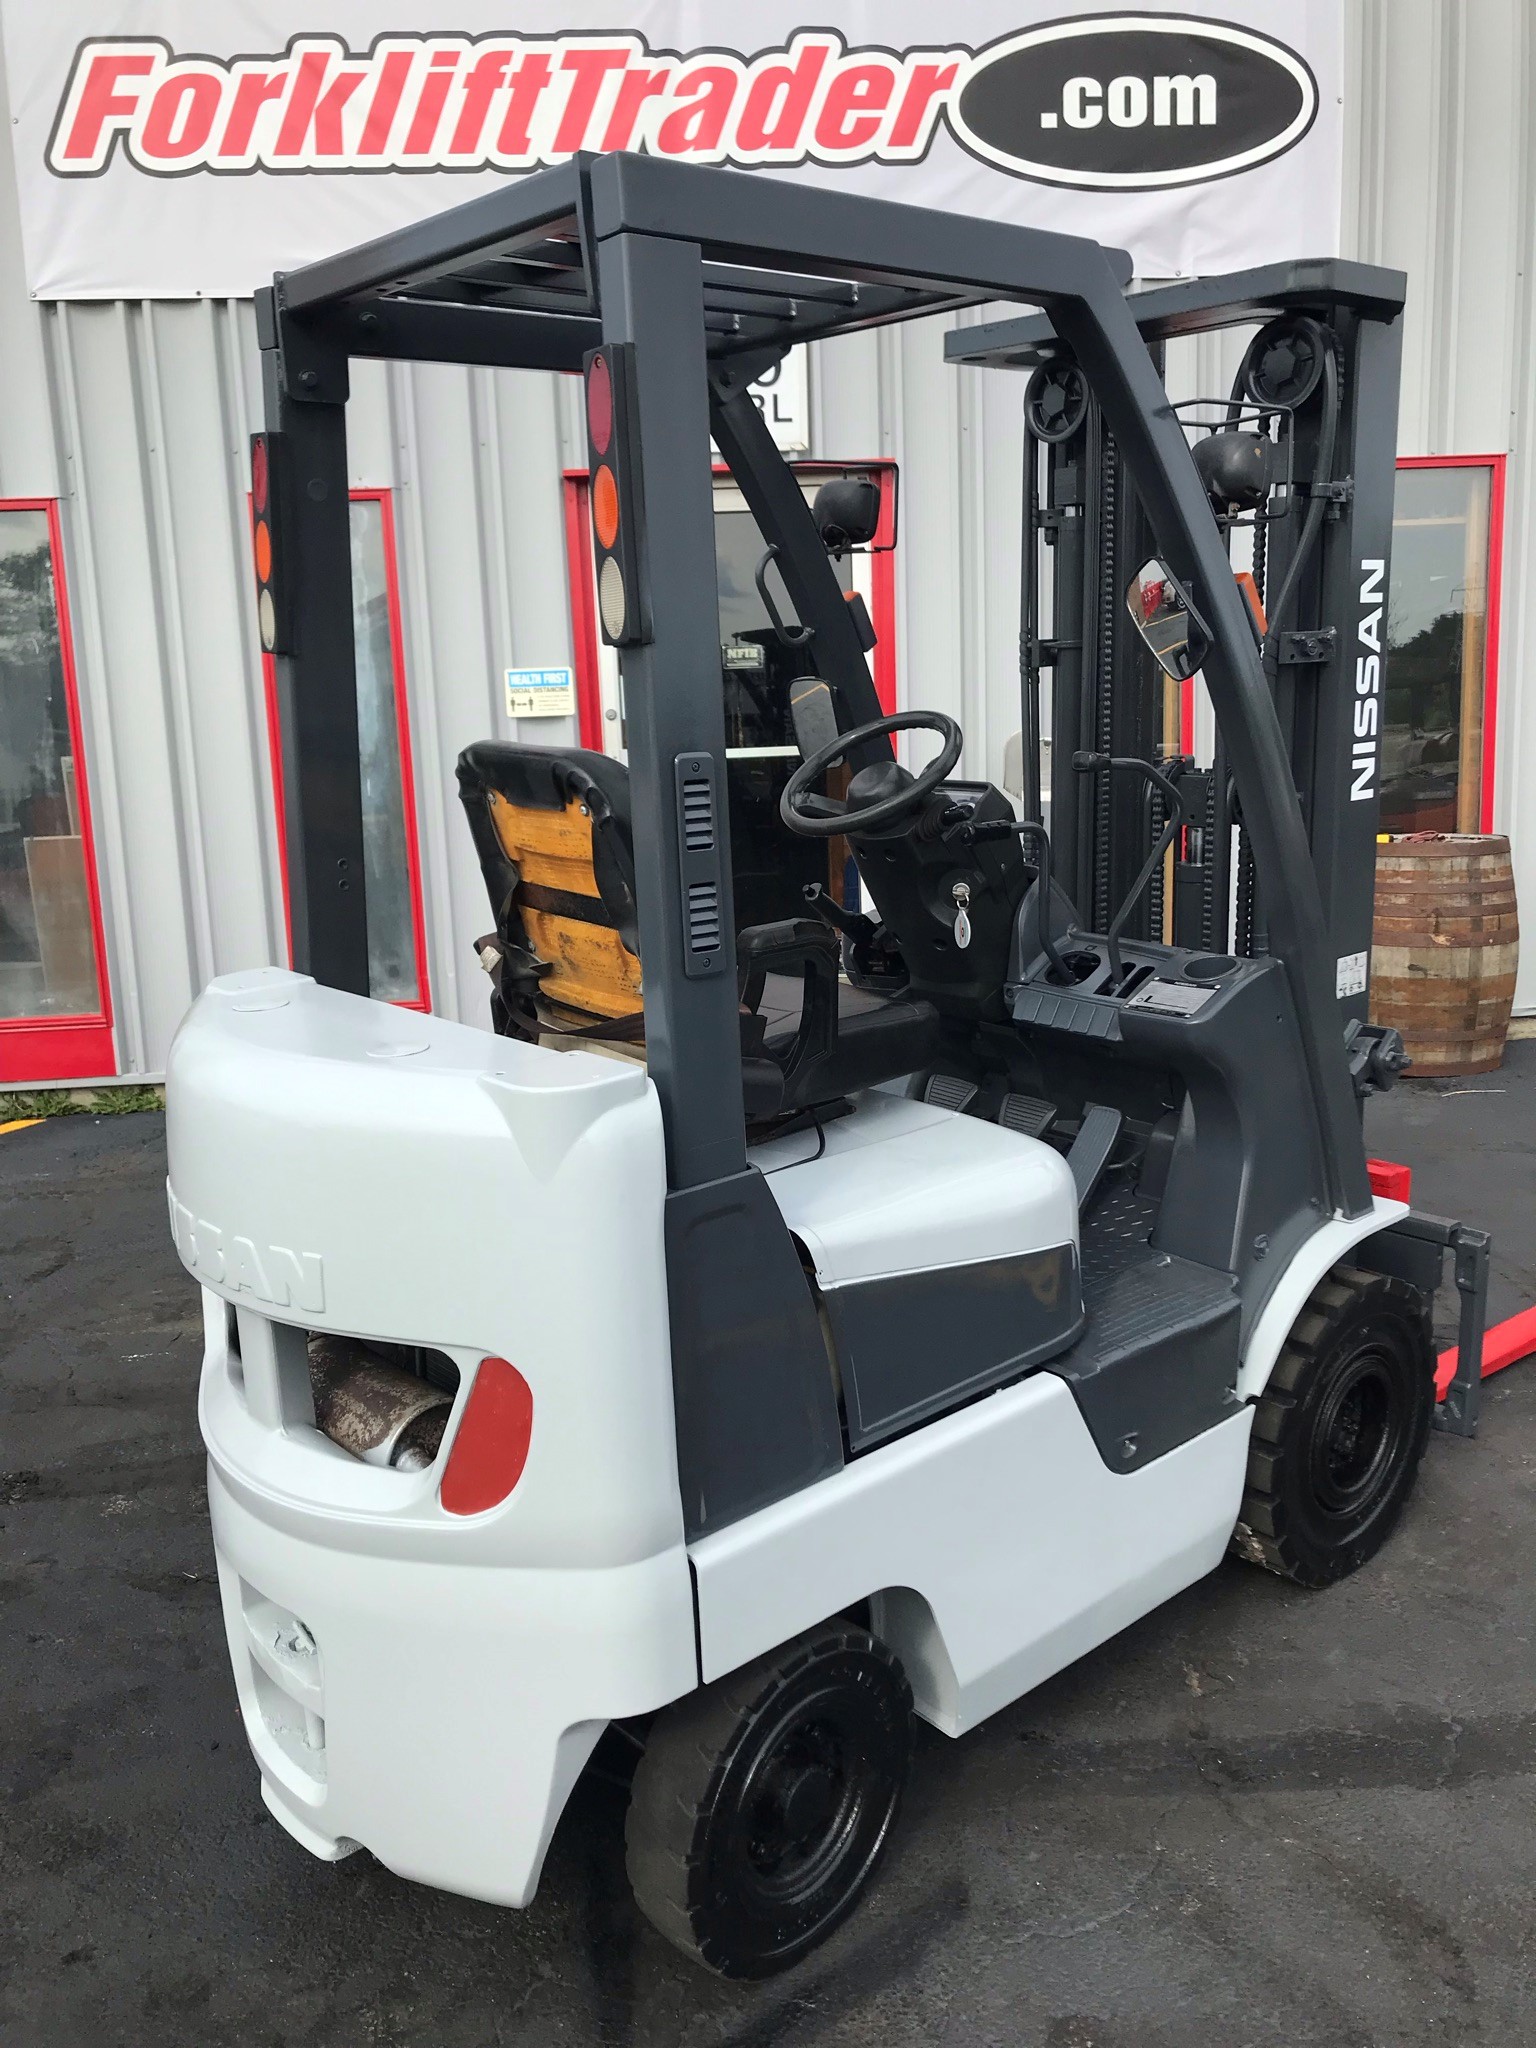 Used Nissan Forklifts For Sale Reconditioned Lift Trucks From Certified Mechanics Forklifttrader Com M W Industrial Equipment Co Waukesha Wisconsin